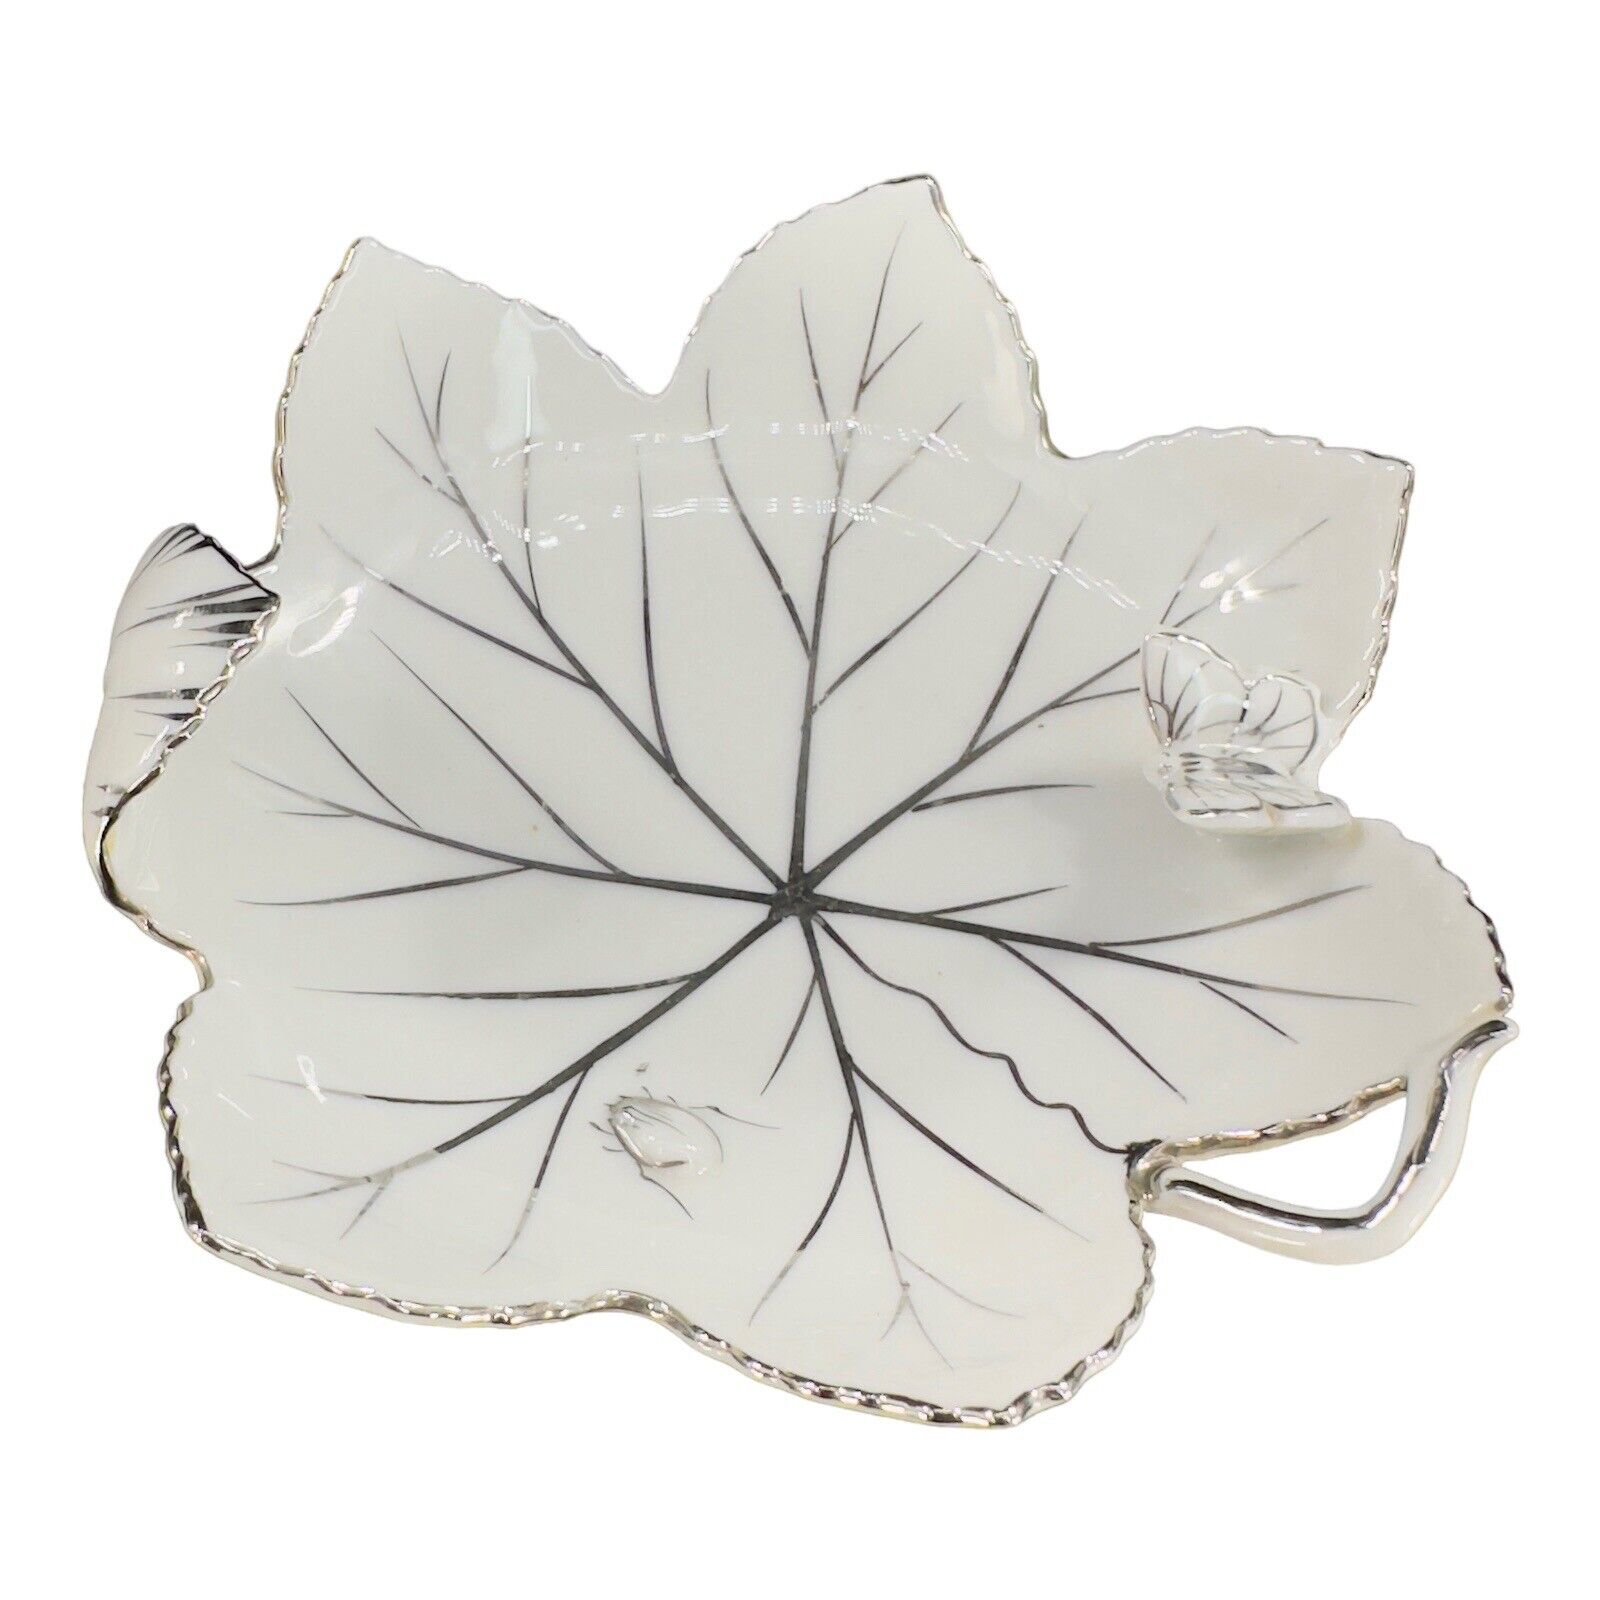 Andrea By Sadek Hand Painted Leaf Dish Bowl Silver Overlay Butterfly And A Bug